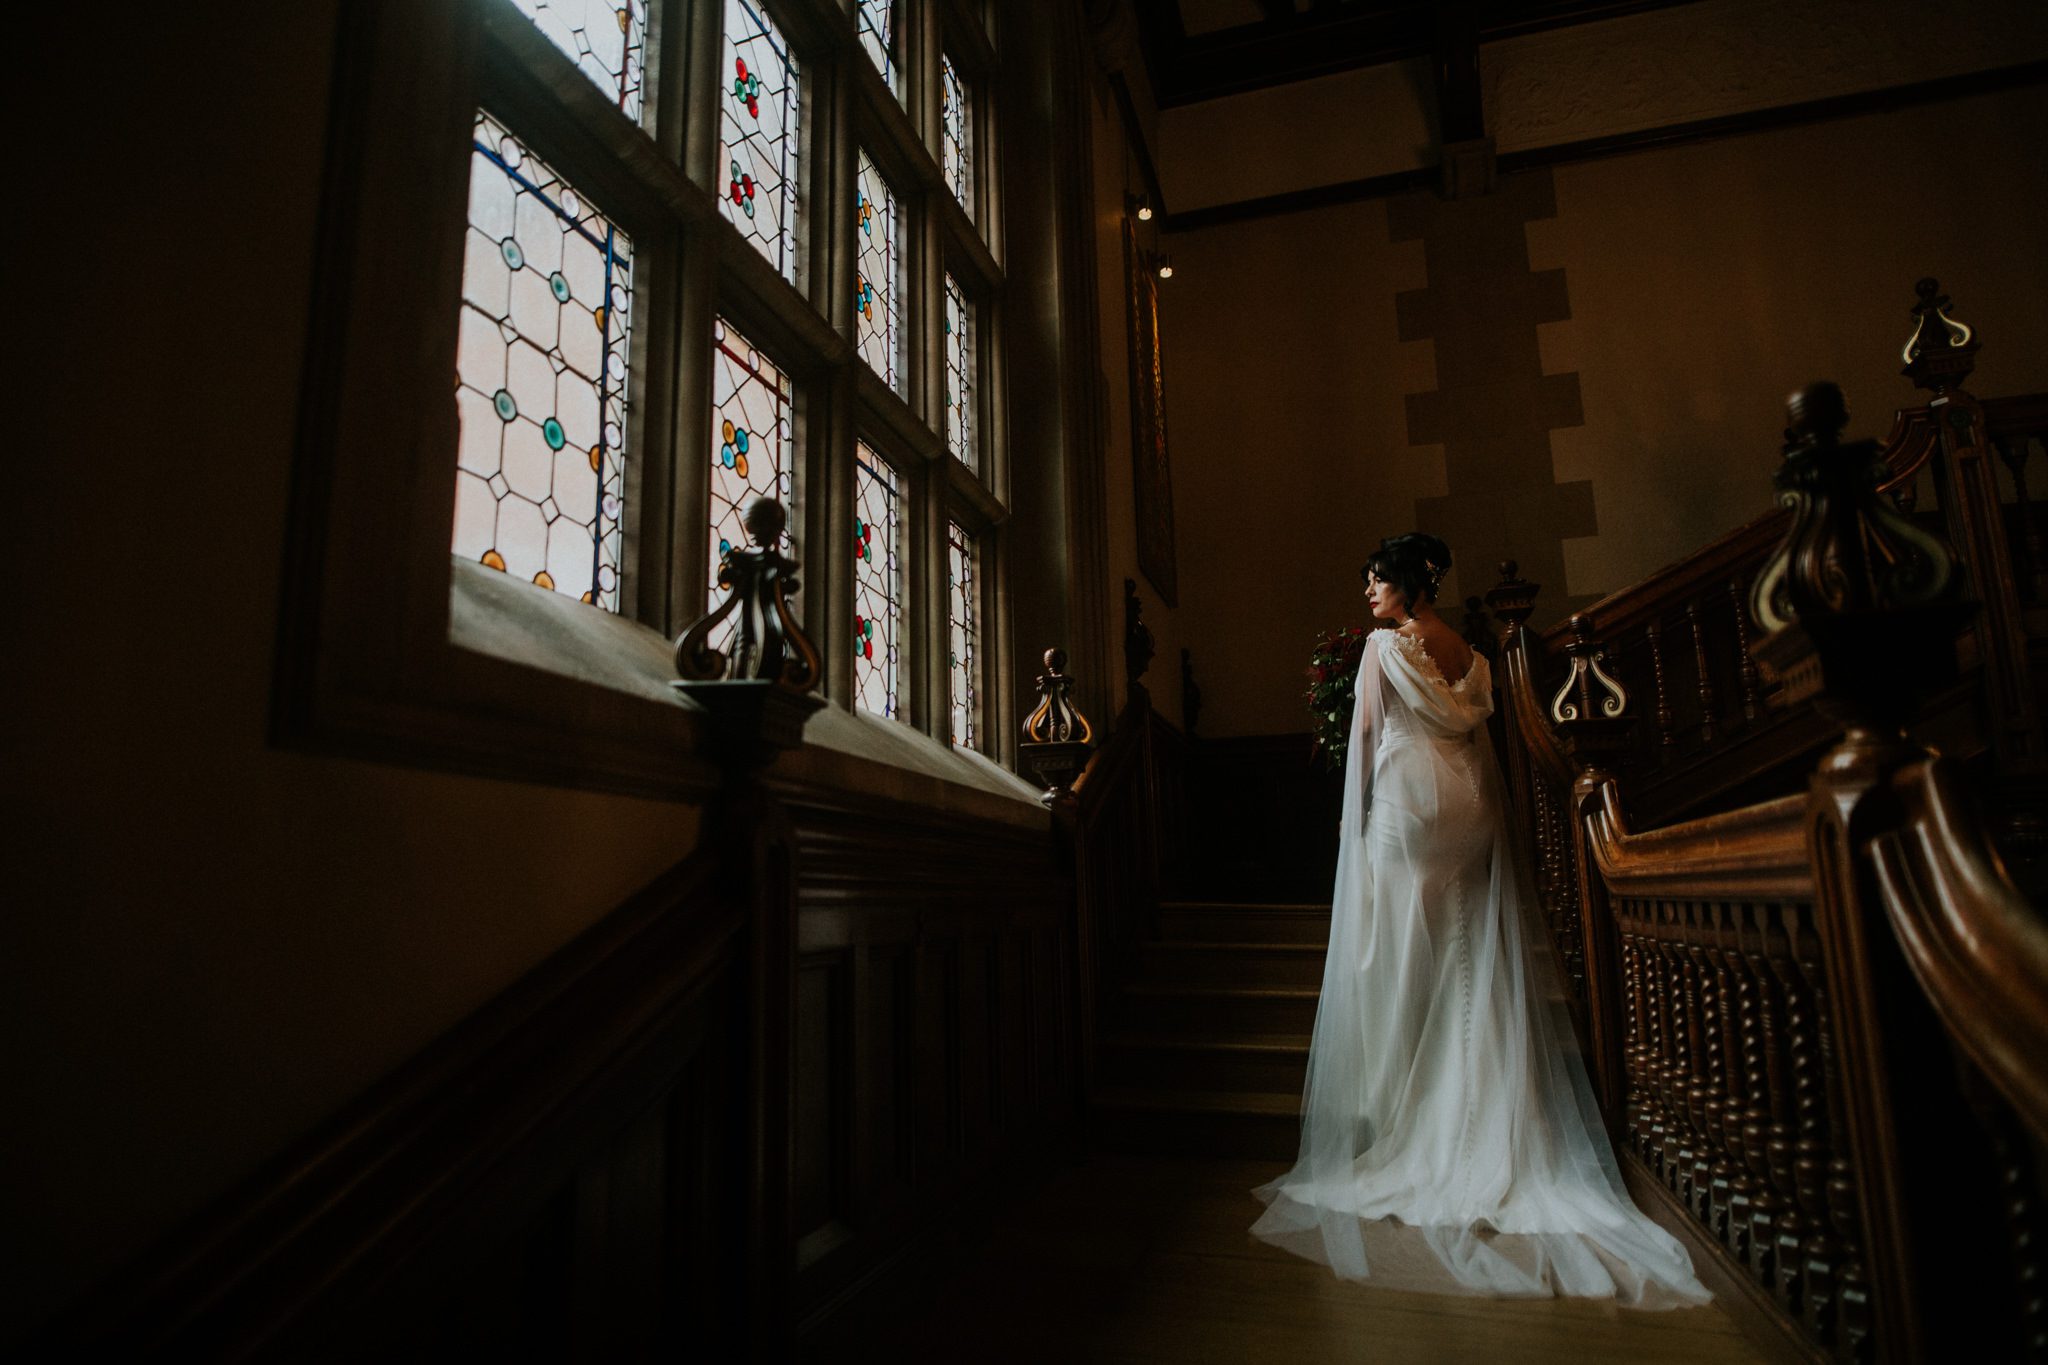 A bride gazes towards a winow on some grand stairs at Penderley Manor